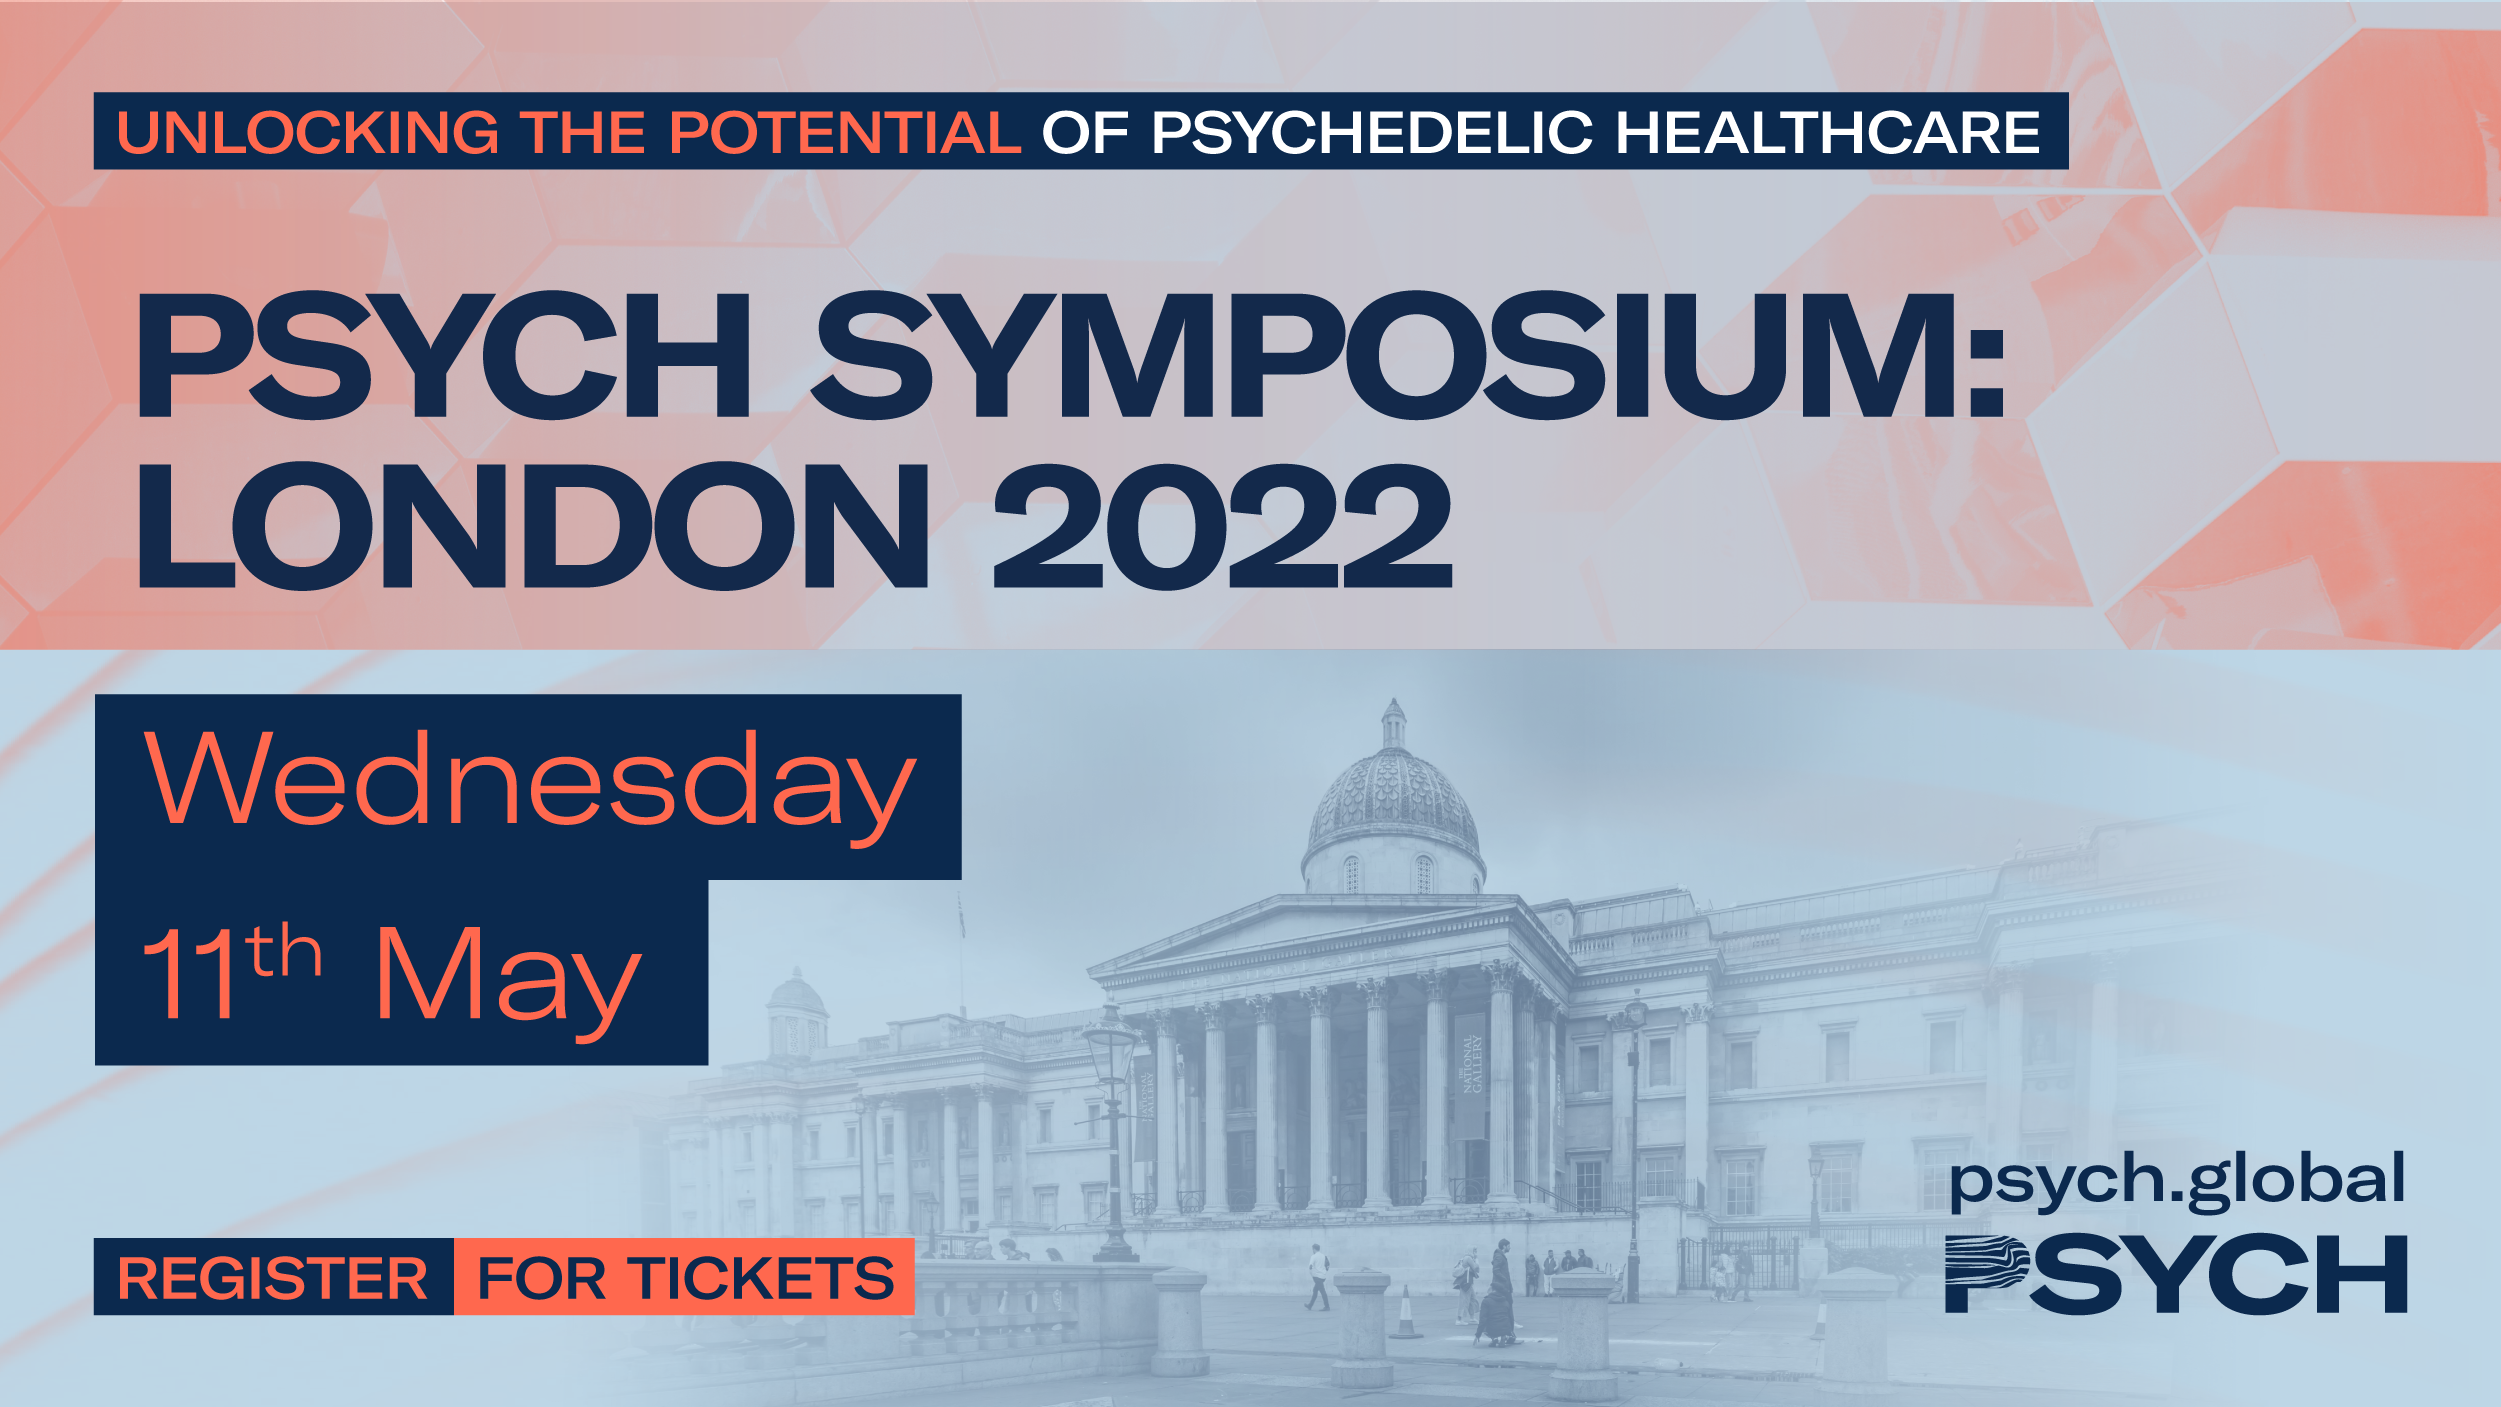 PSYCH Symposium Europe's premier psychedelic conference